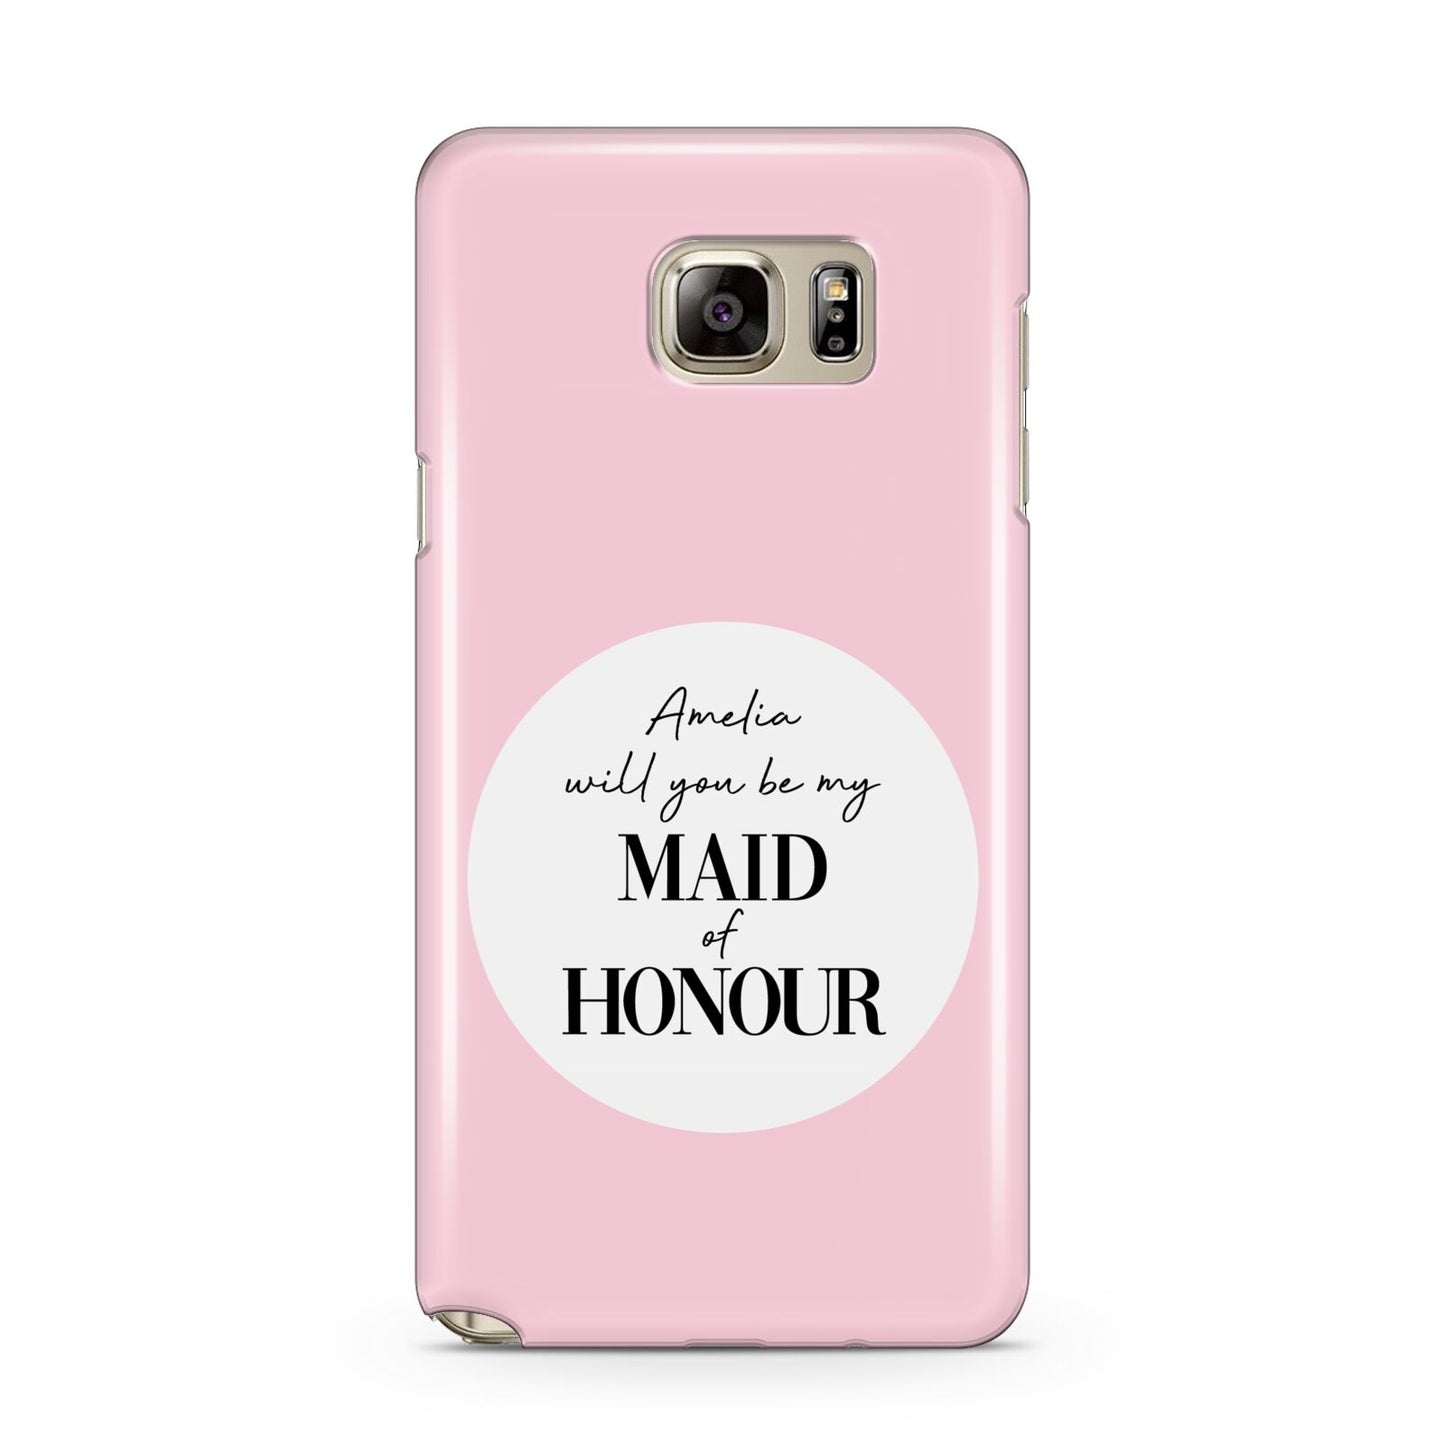 Will You Be My Maid Of Honour Samsung Galaxy Note 5 Case